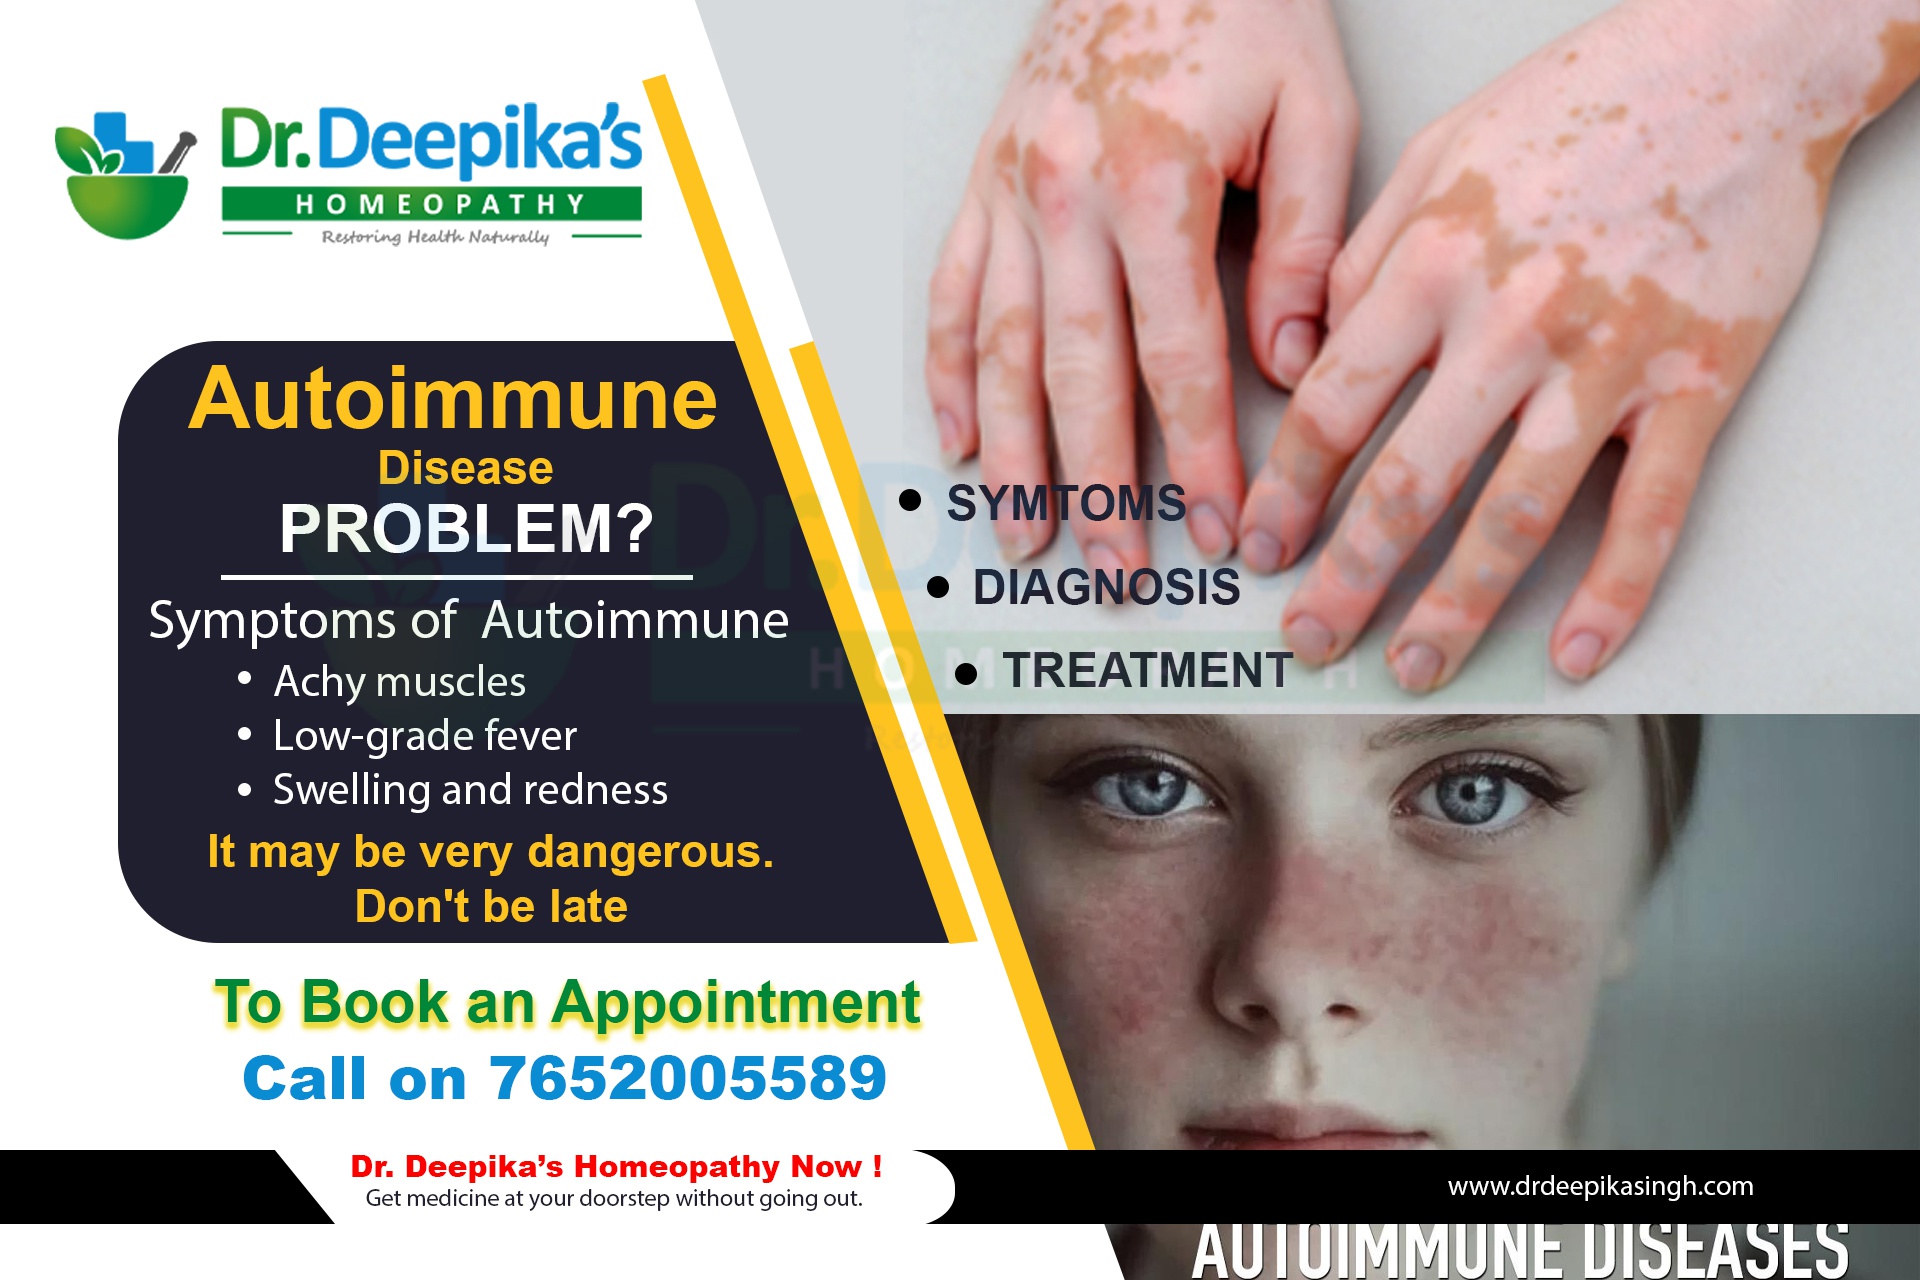 What is autoimmune disease? & How it can cure naturally using homeopathy?